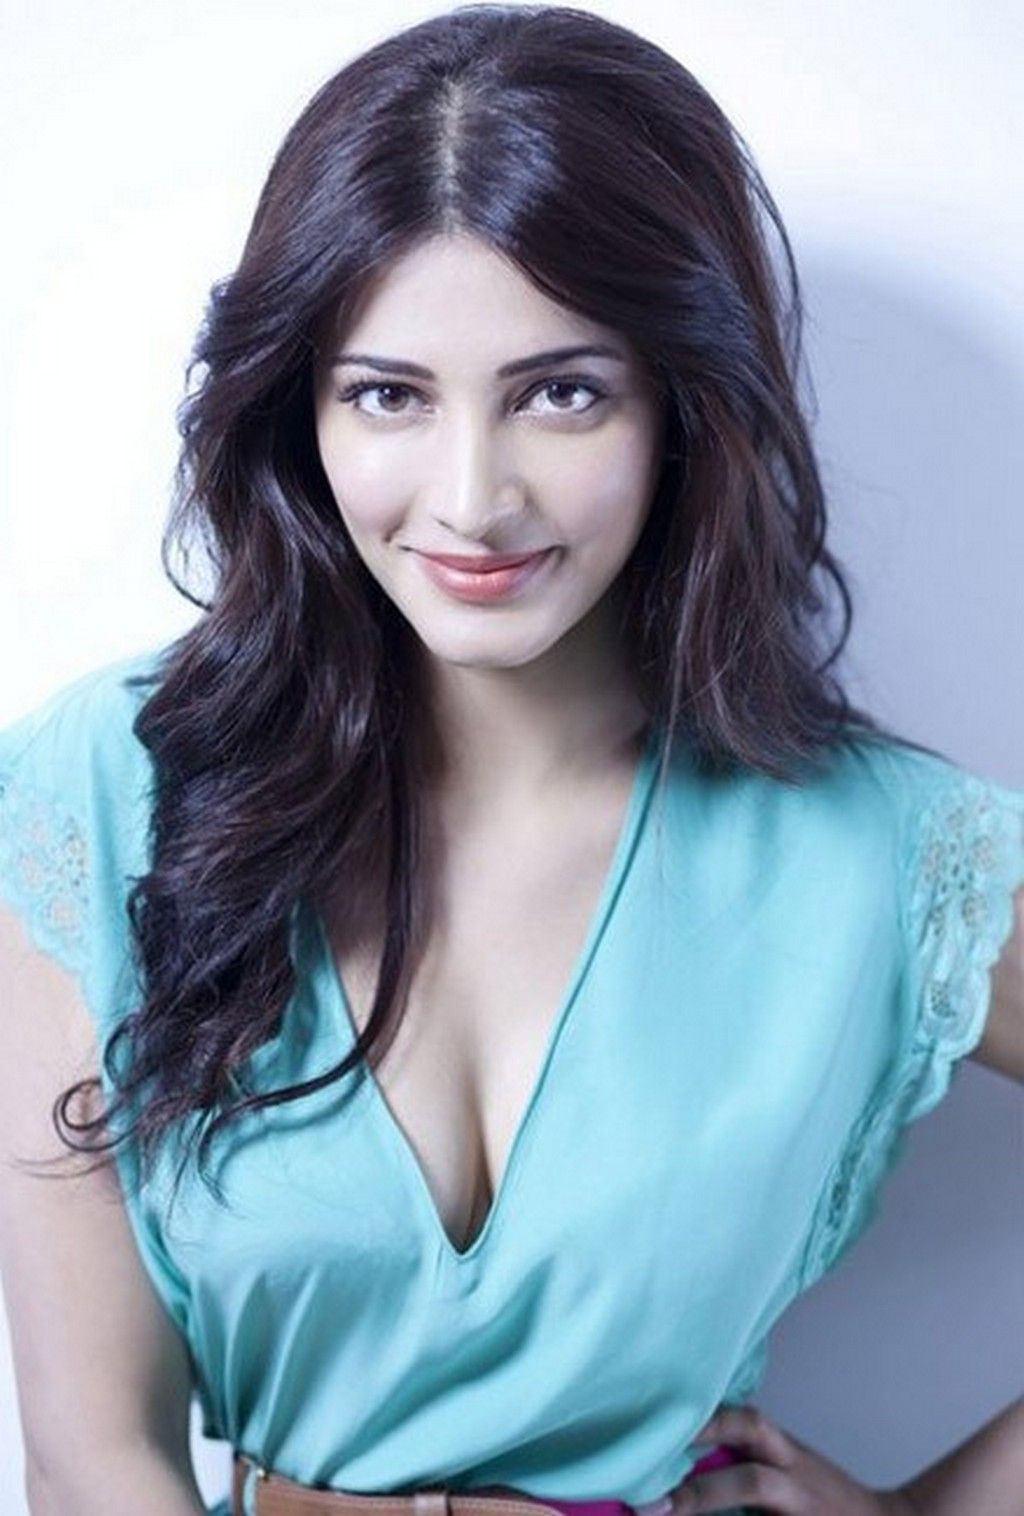 Actress Shruti Haasan Joins Hand With Hotstar For Tamil Audiences